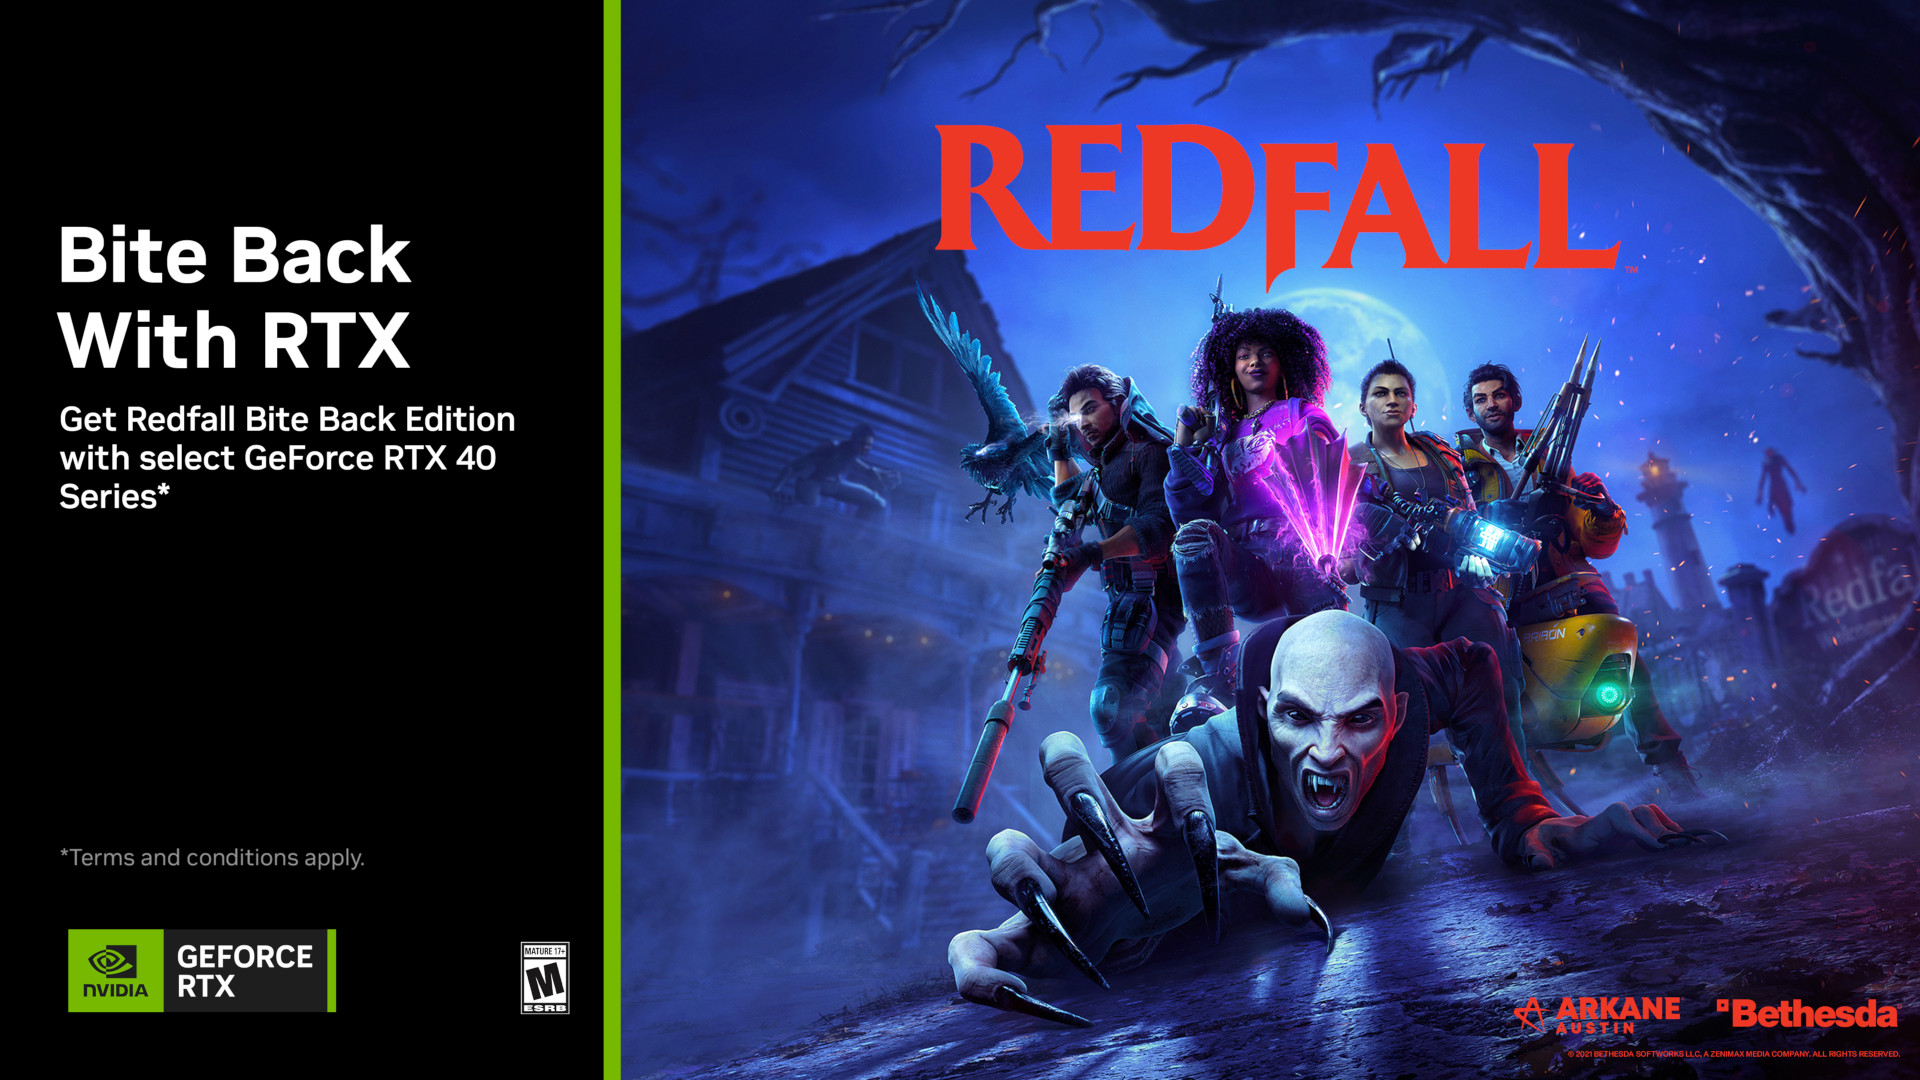 Get Redfall for free with this new Nvidia GeForce RTX 4000 GPU bundle